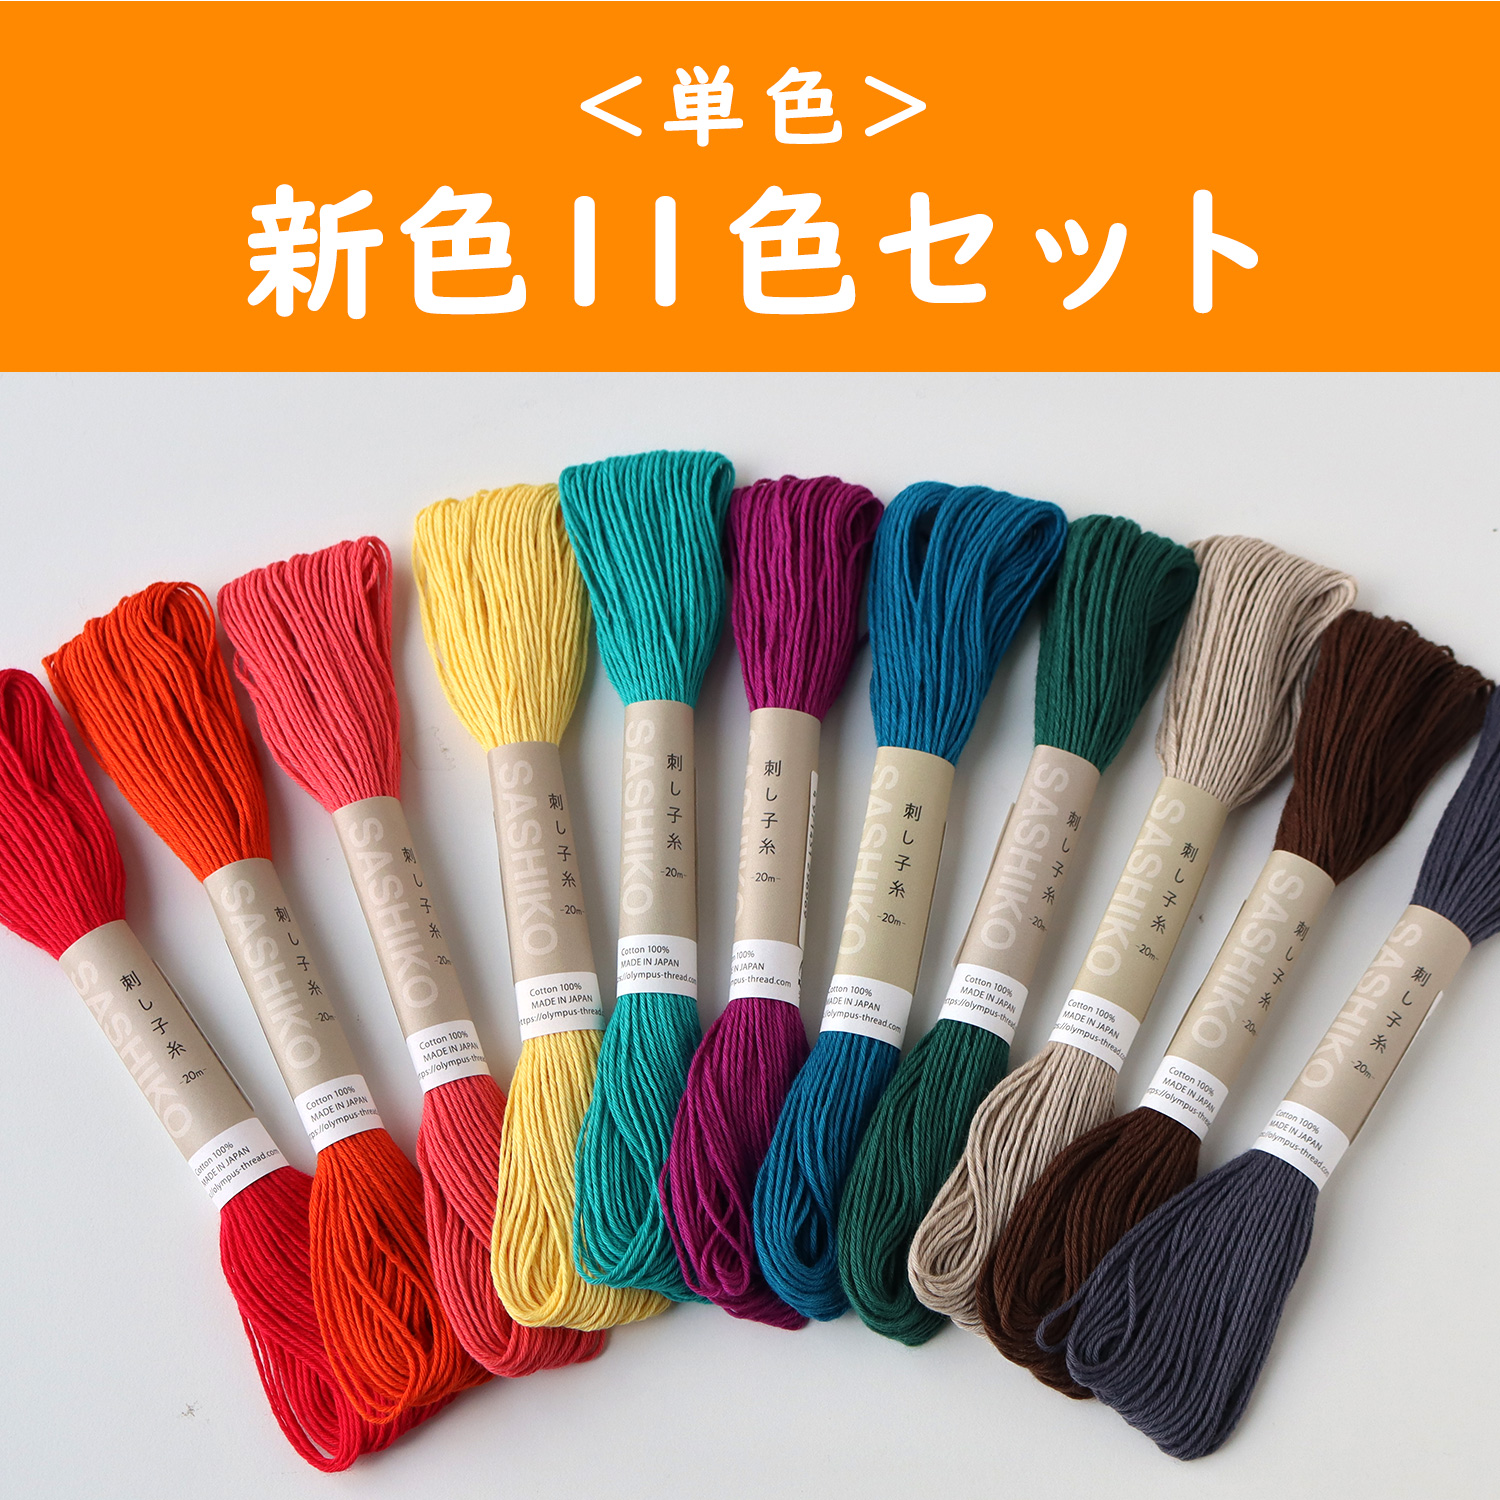 OS-20M-N11SET Olympus SASHIKO Embroidery Thread [Single color] Set of 11 new colors", 1color/pack 20m (set)